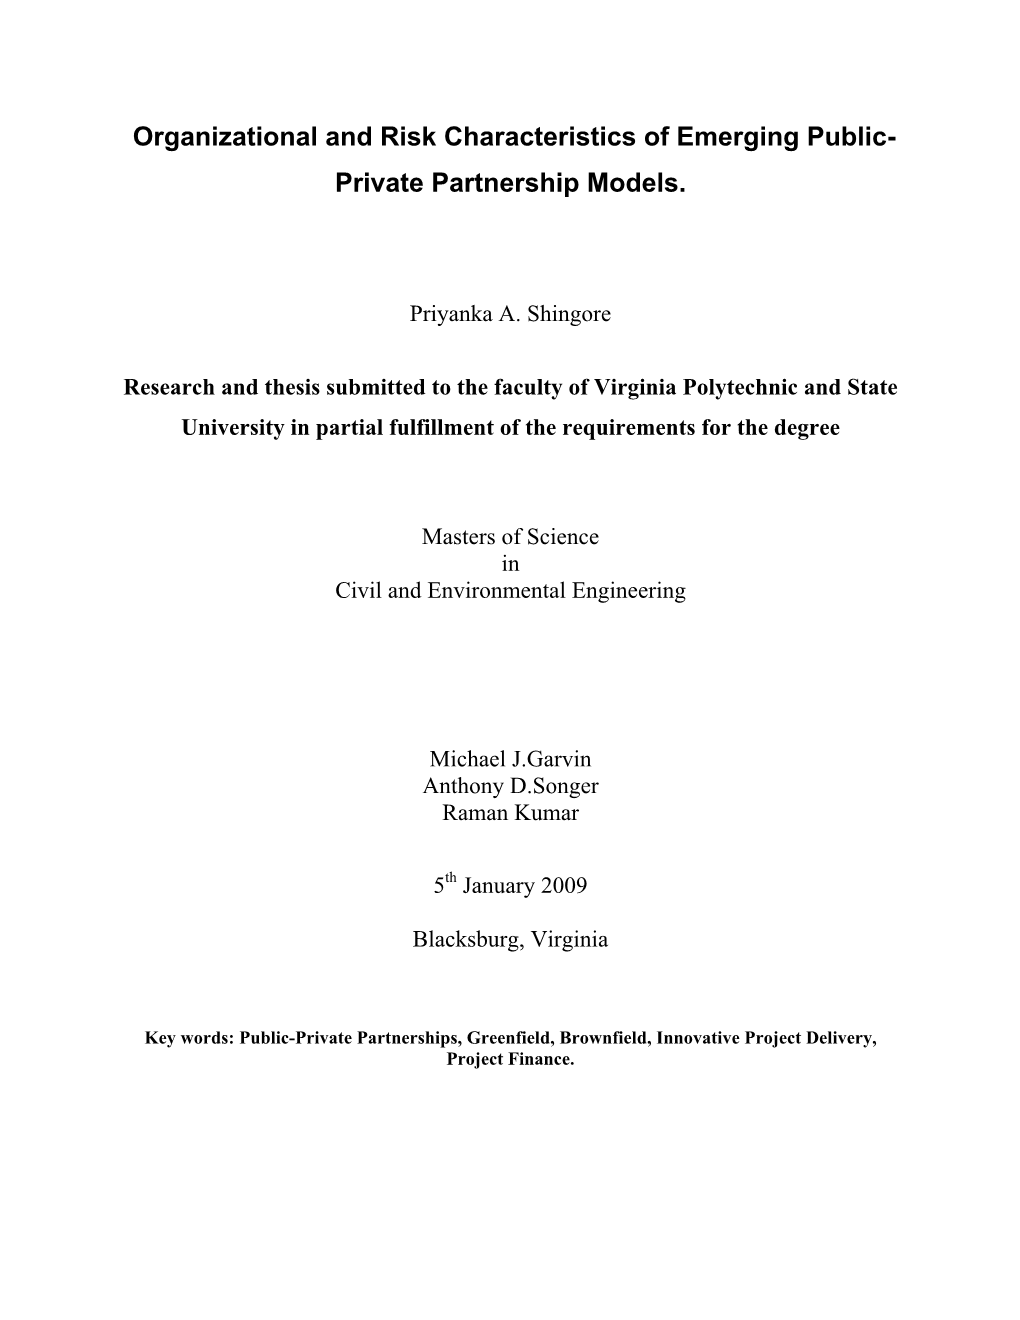 Organizational and Risk Characteristics of Emerging Public- Private Partnership Models